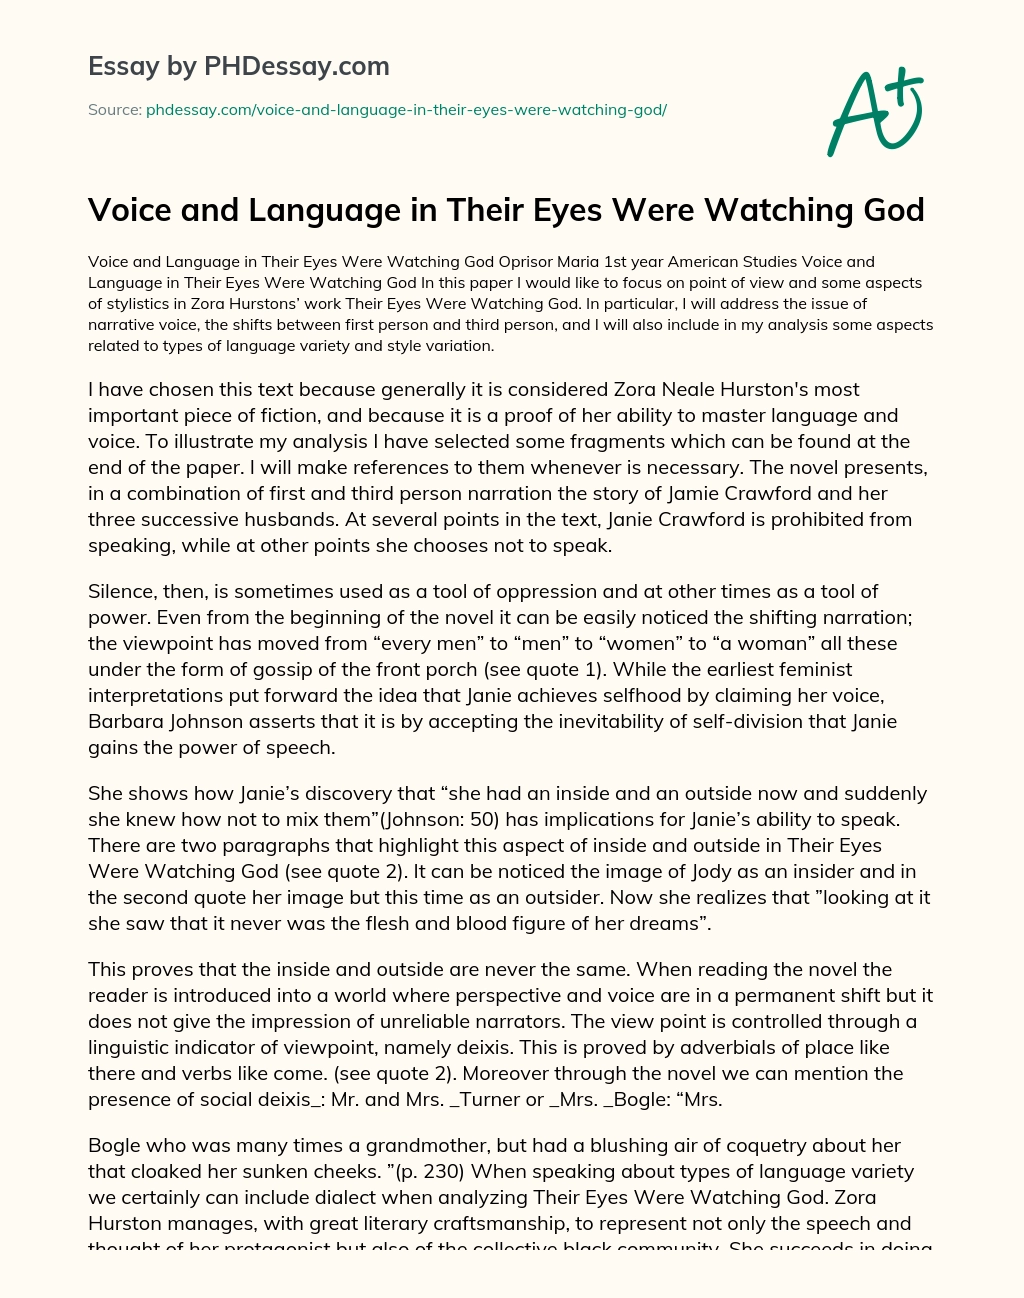 Voice and Language in Their Eyes Were Watching God essay